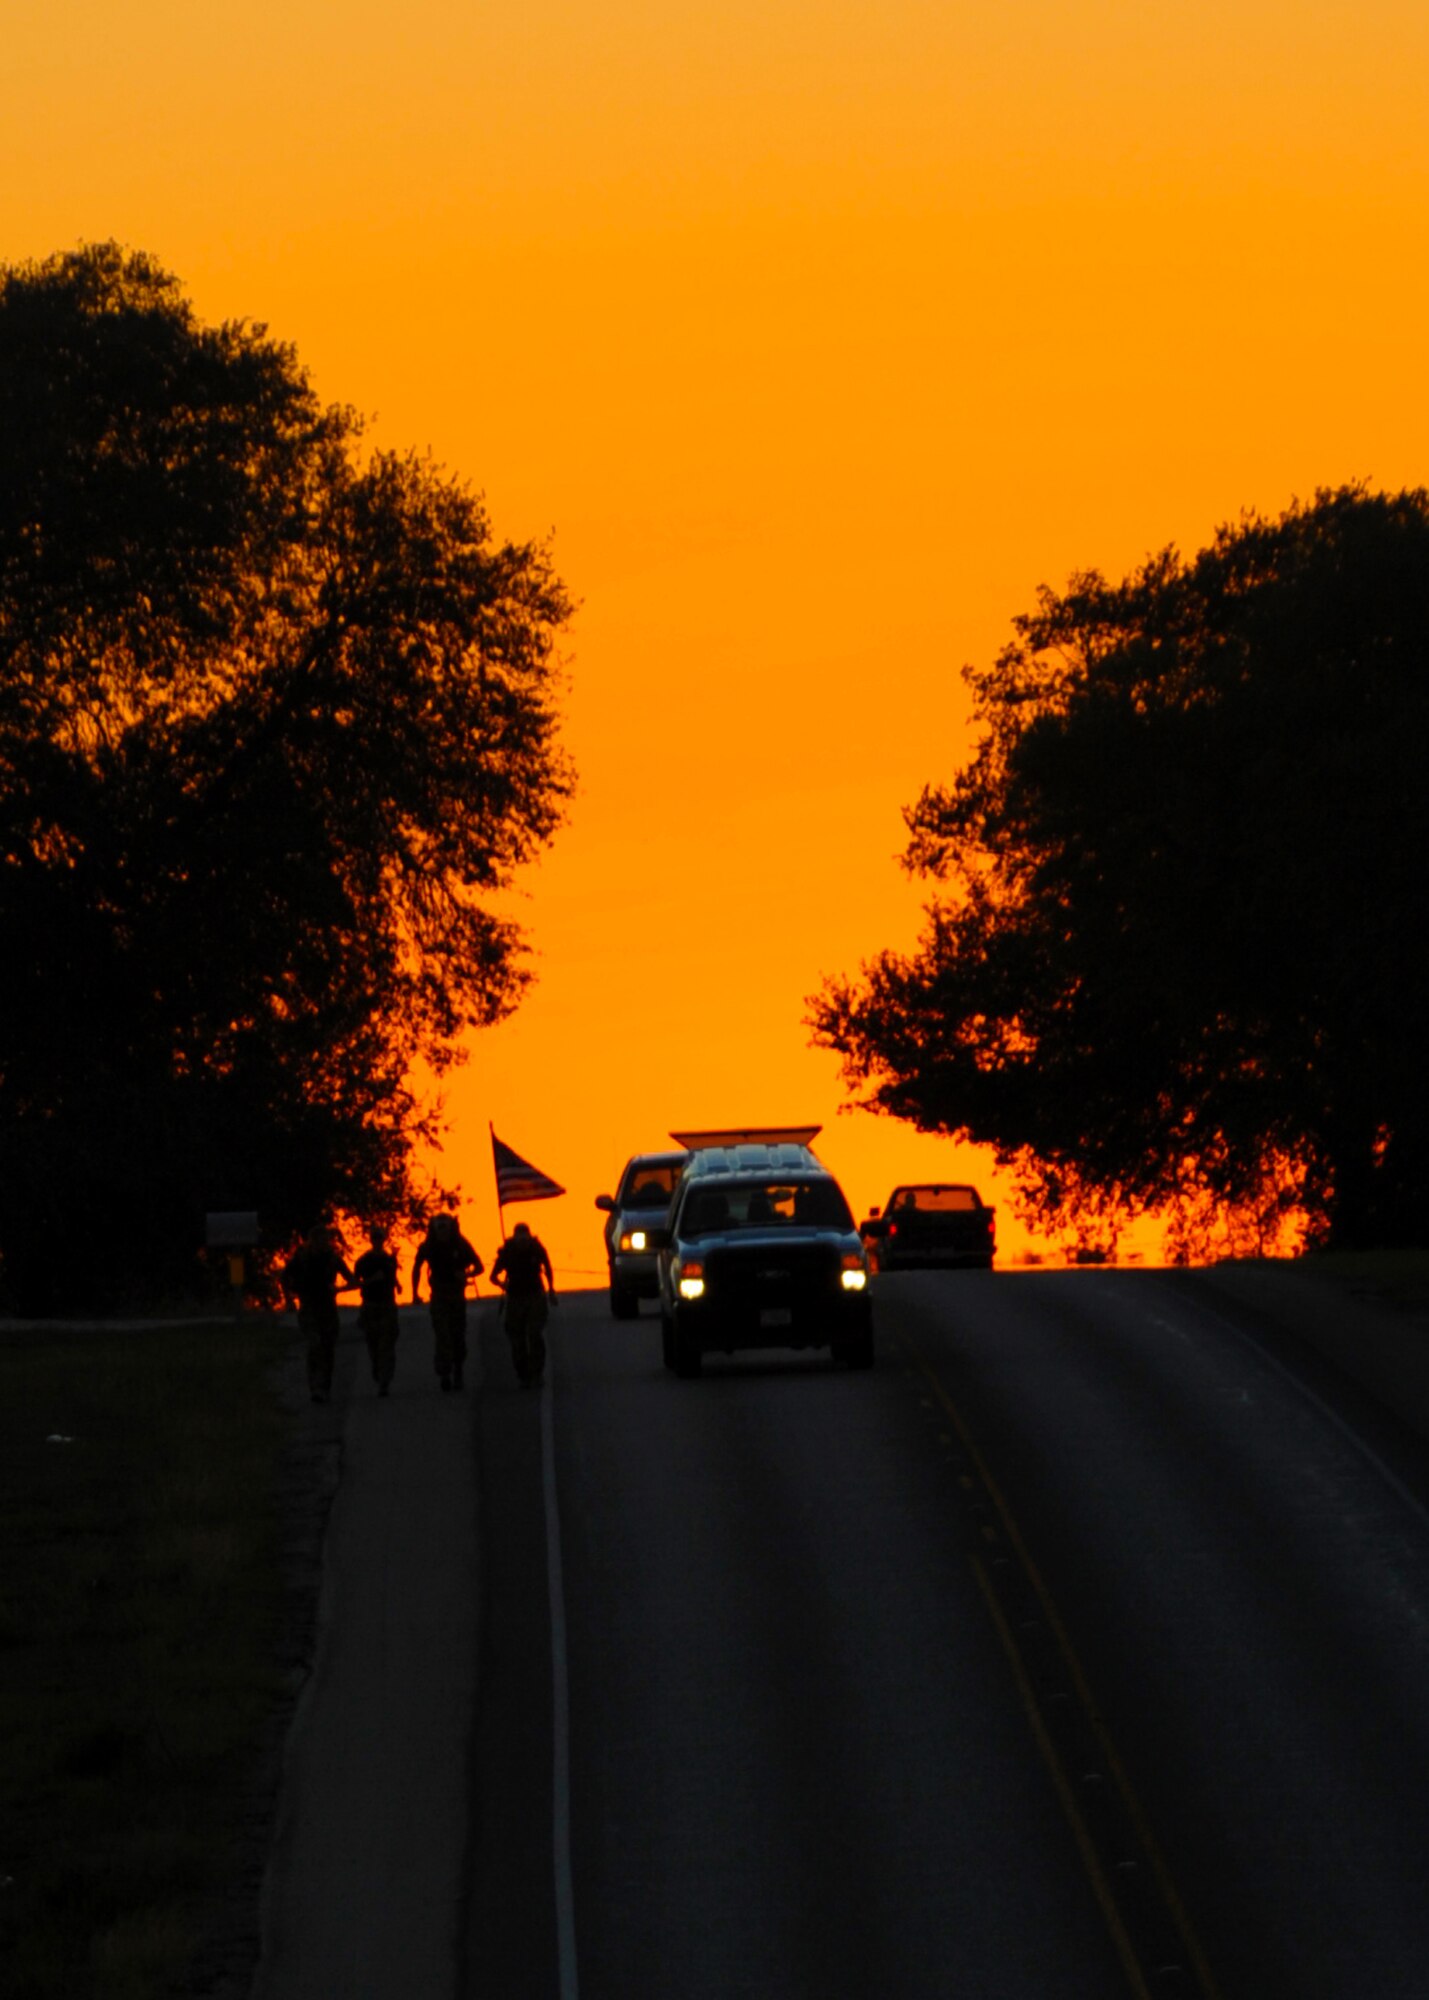 Members of Team 5 pass through Schulenburg, Texas, during the Tim Davis Memorial March Oct. 17, 2011. The march, which began in San Antonio, Texas,  honors fallen Special Tactics Airmen and consists of six three-man teams relaying 24 hours a day. Each team will walk about 144 miles while carrying 50-pound rucksacks.  The march ends at Hurlburt Field, Fla., Oct. 26, 2011. (U.S. Air Force photo by Staff Sgt. Sharida Jackson)